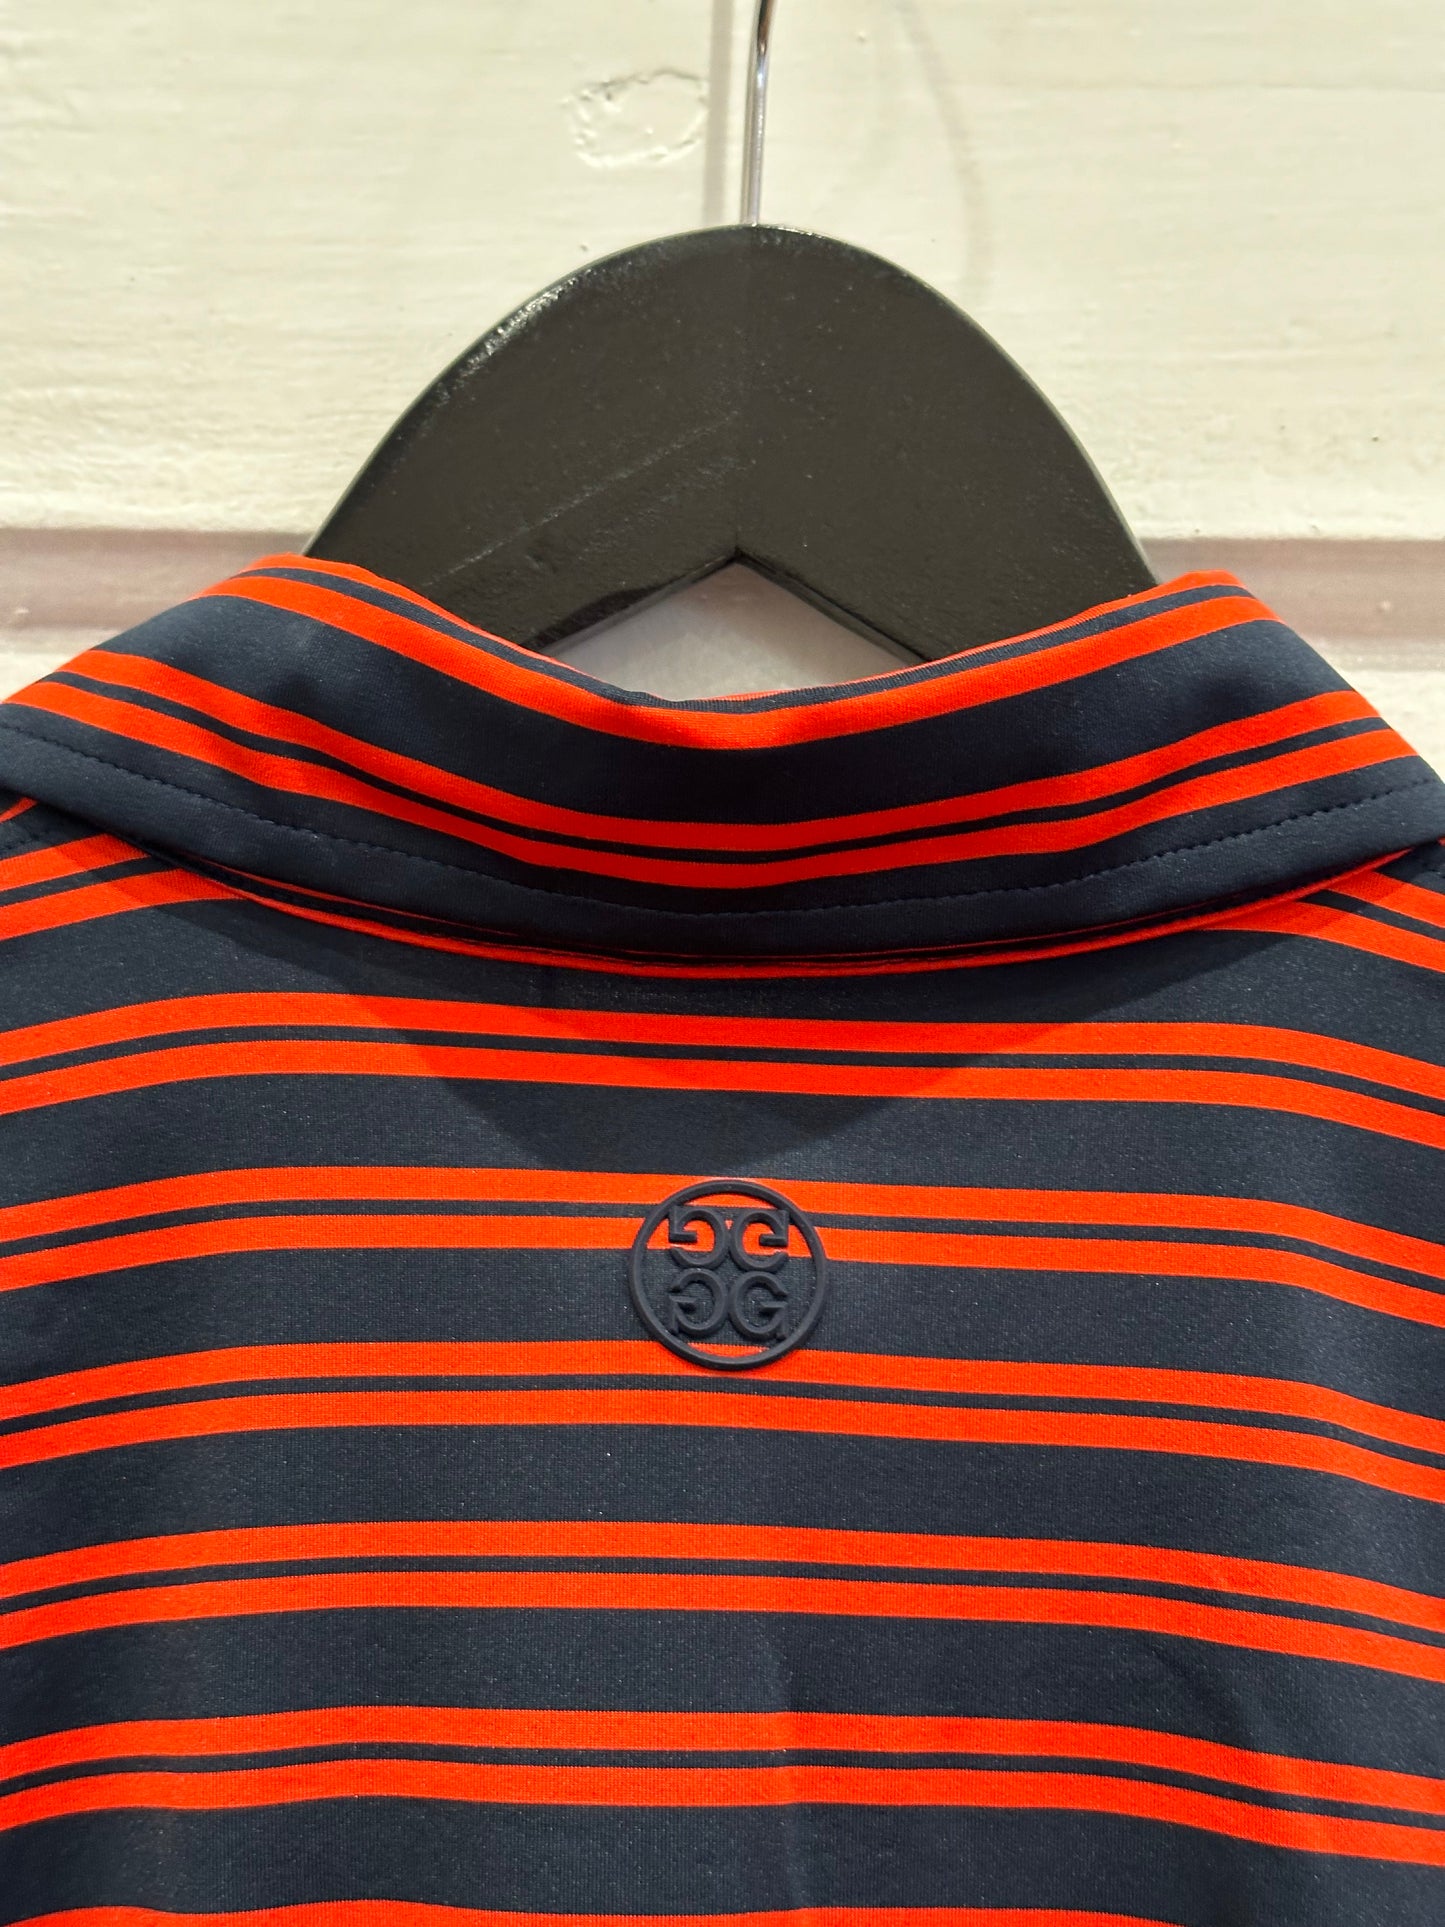 G/Fore Striped Polo (Navy/Red)